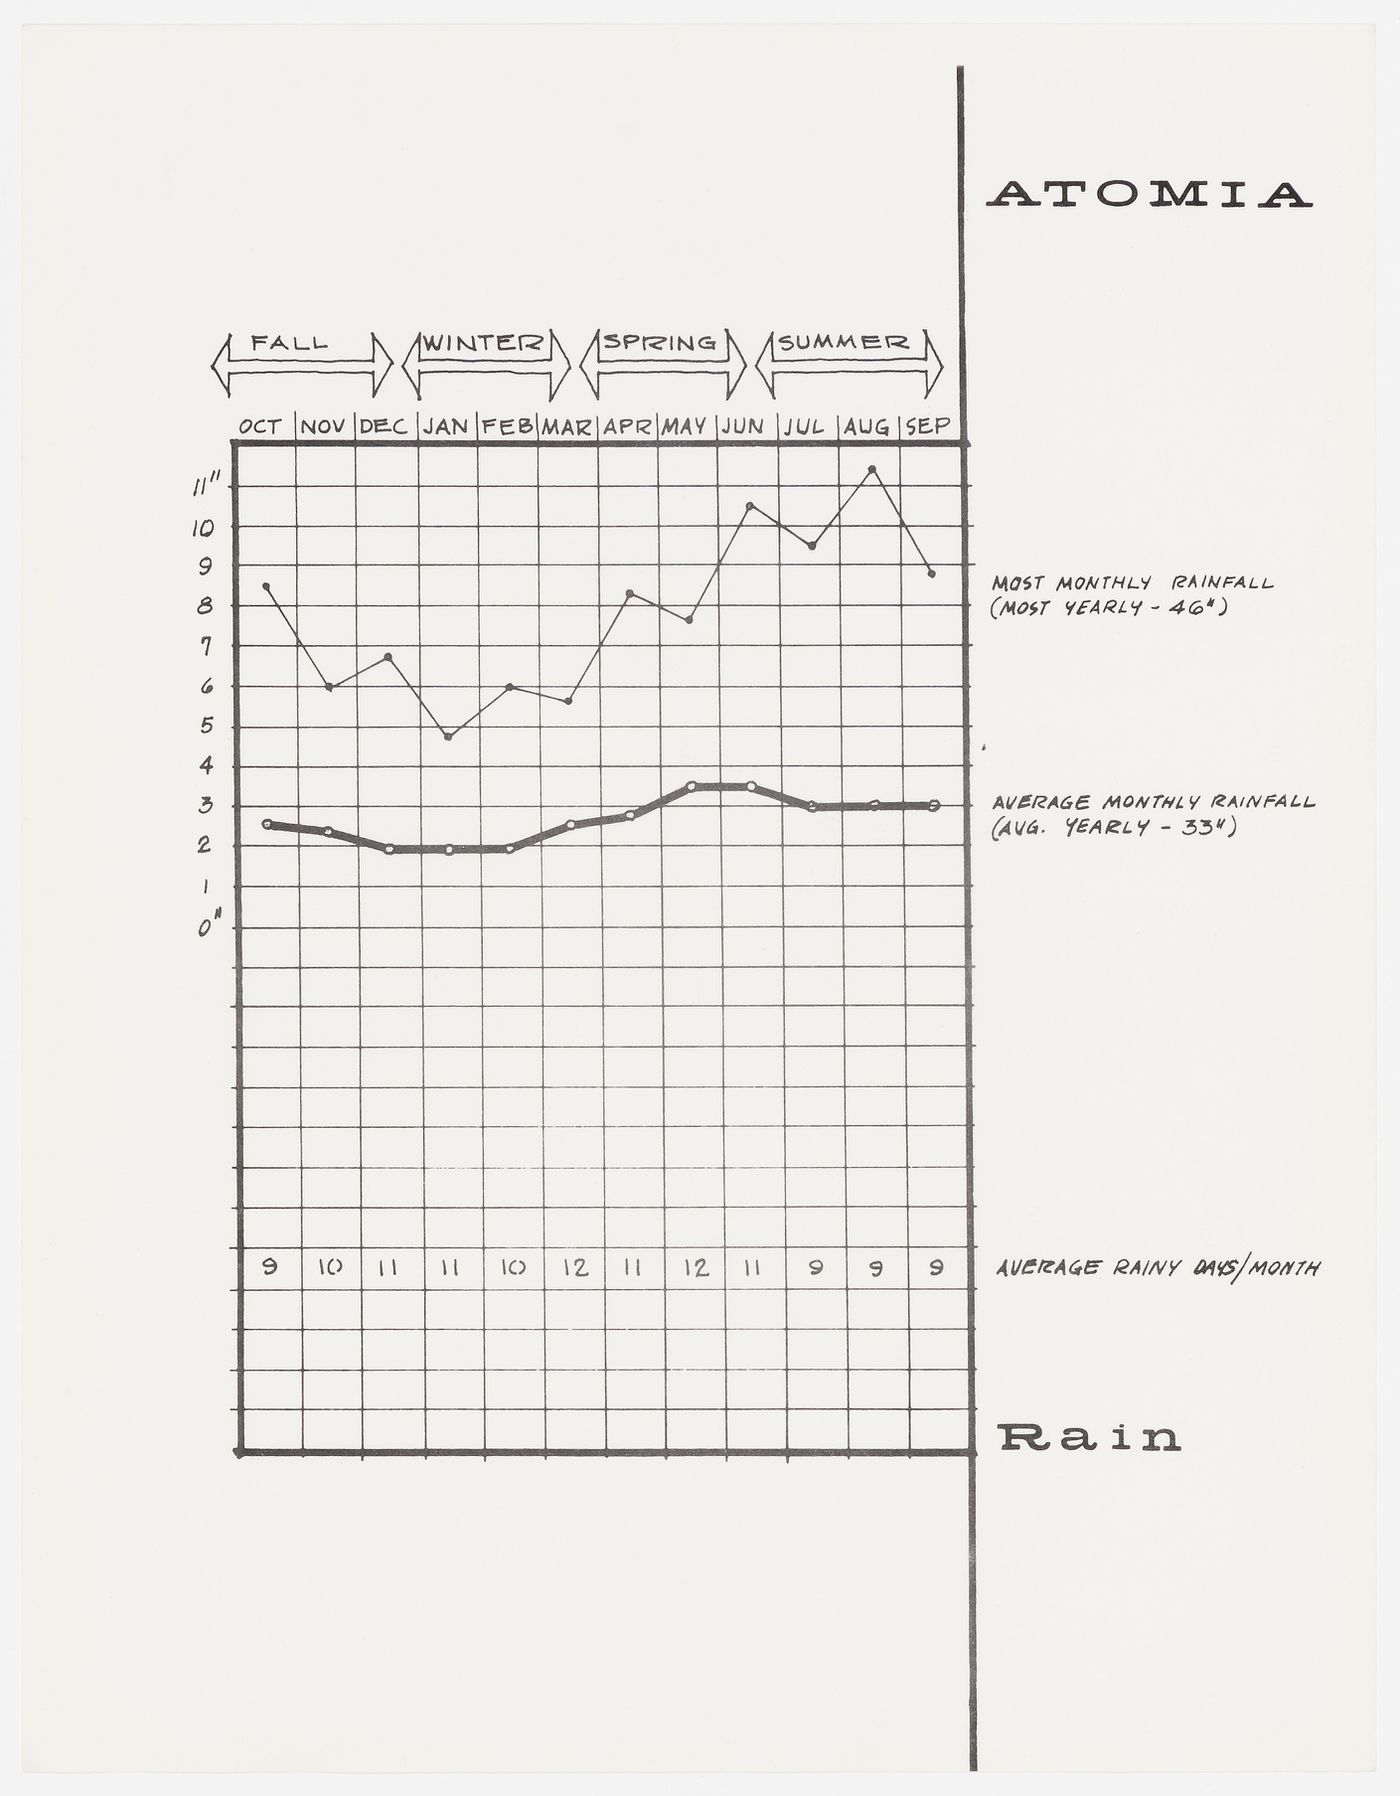 Atomia: rainfall statistics chart (document from the Atom project records)